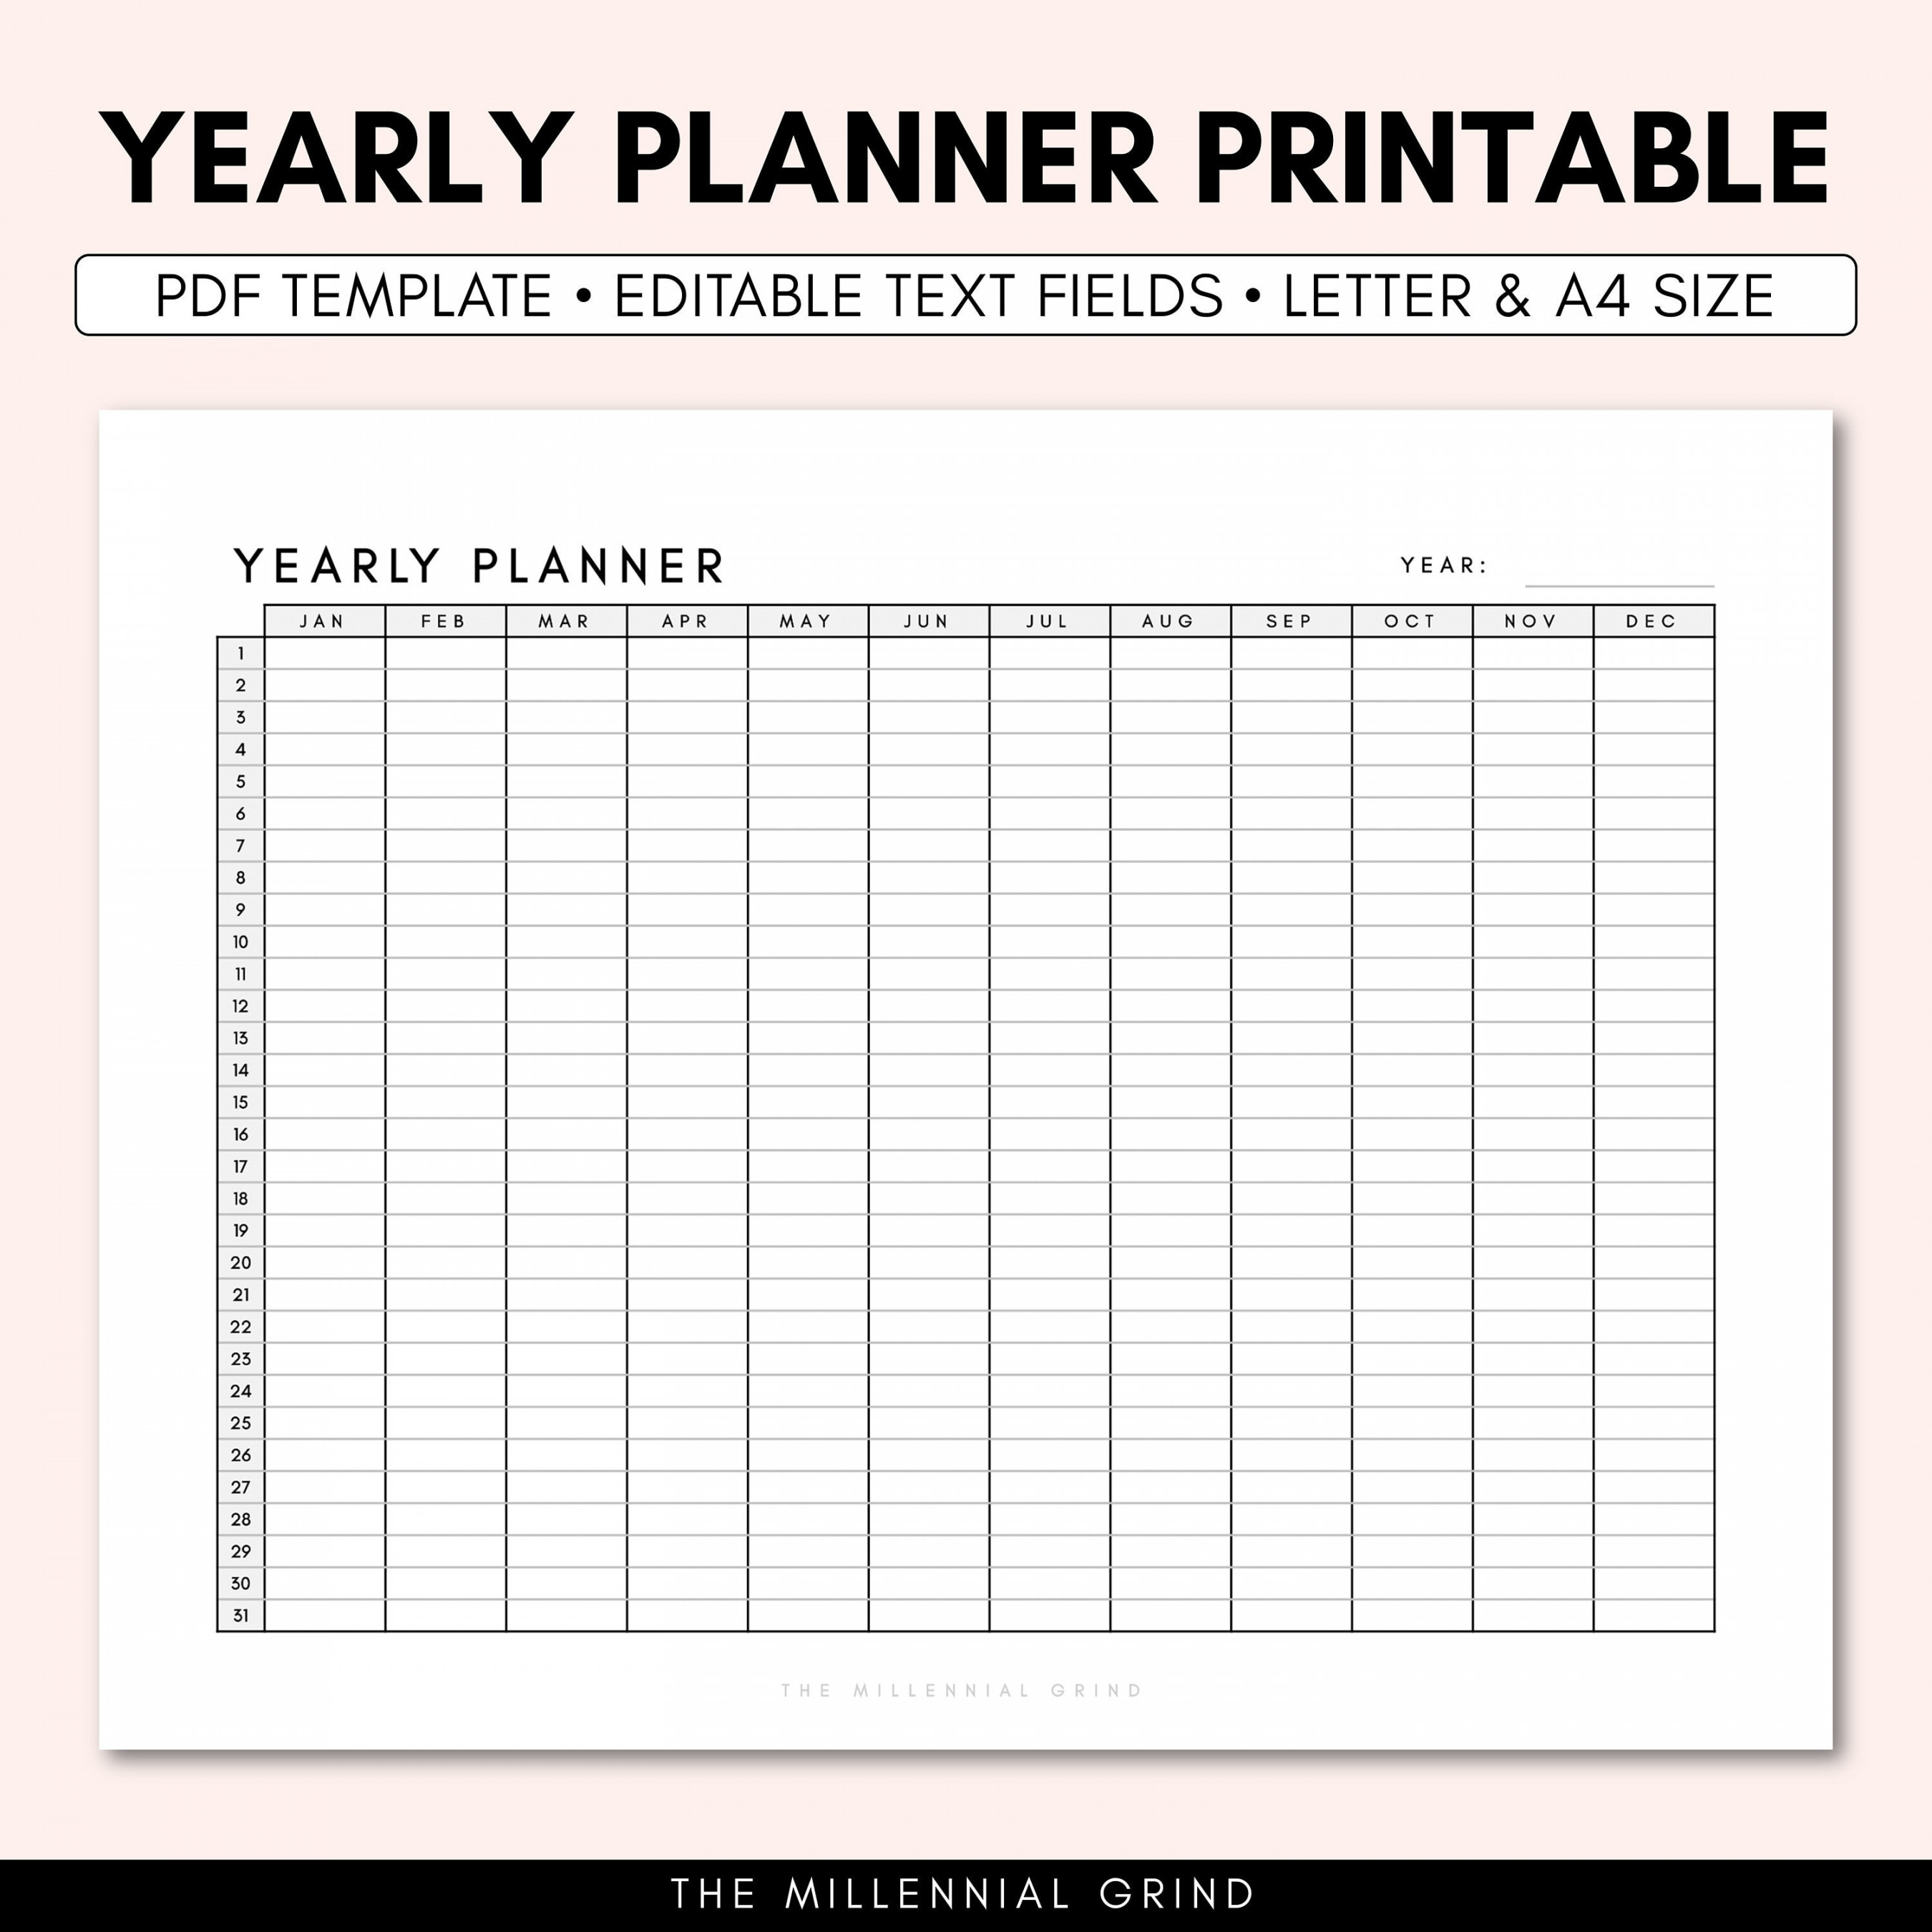 Yearly Planner Printable Yearly Planner PDF Template - Etsy